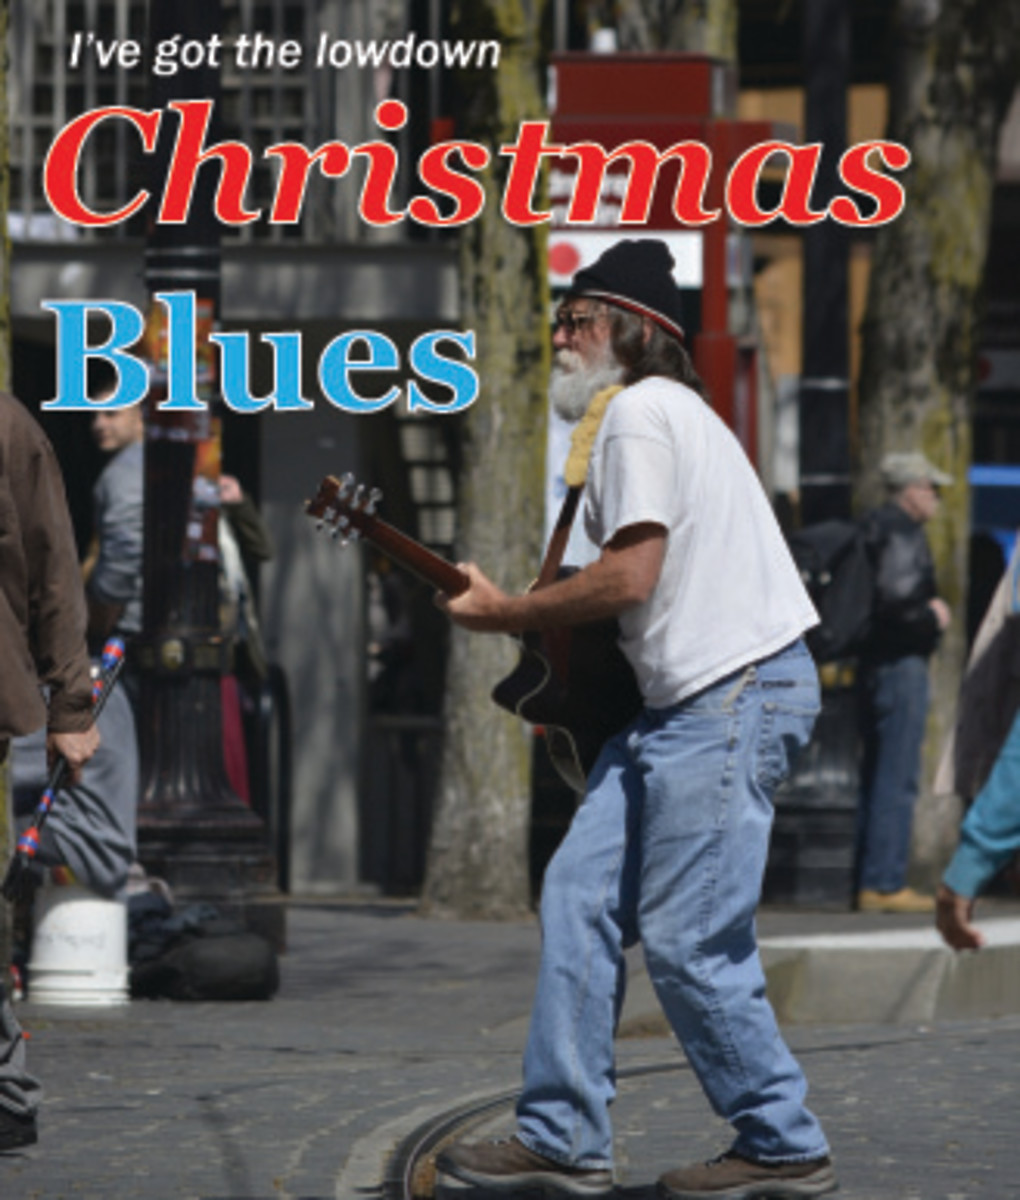 Christmas Blues: Ten Blue Songs About Christmas